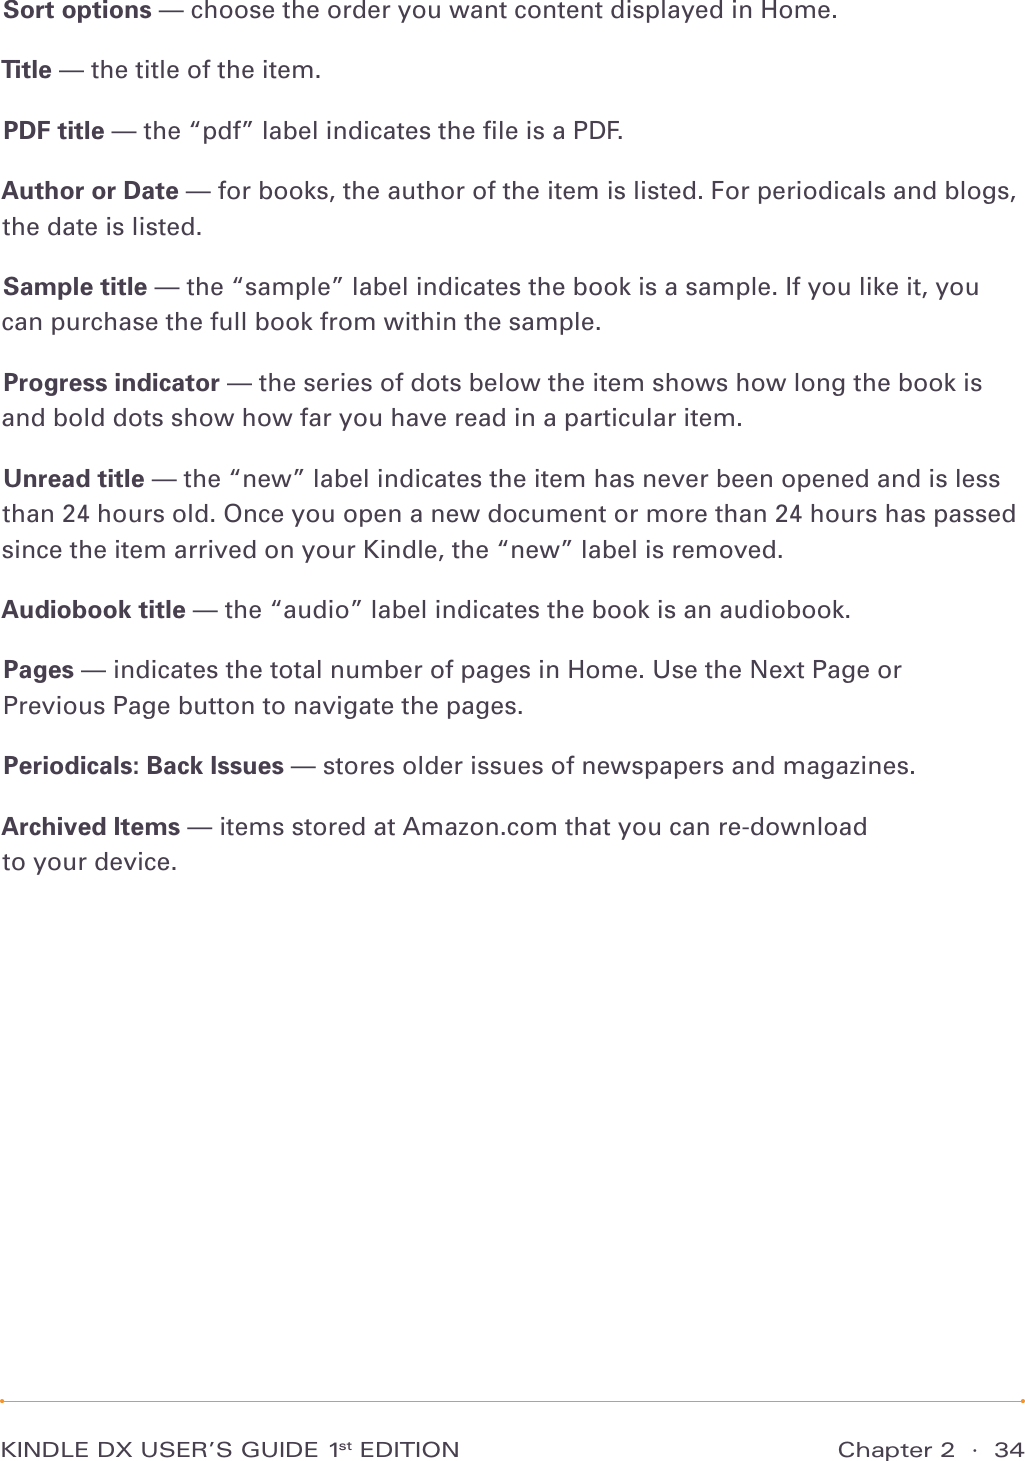 Chapter 2  ·  34KINDLE DX USER’S GUIDE 1st EDITIONSort options — choose the order you want content displayed in Home.Title — the title of the item.PDF title — the “pdf” label indicates the ﬁle is a PDF.Author or Date — for books, the author of the item is listed. For periodicals and blogs, the date is listed.Sample title — the “sample” label indicates the book is a sample. If you like it, you can purchase the full book from within the sample.Progress indicator — the series of dots below the item shows how long the book is and bold dots show how far you have read in a particular item.Unread title — the “new” label indicates the item has never been opened and is less than 24 hours old. Once you open a new document or more than 24 hours has passed since the item arrived on your Kindle, the “new” label is removed.Audiobook title — the “audio” label indicates the book is an audiobook.Pages — indicates the total number of pages in Home. Use the Next Page or Previous Page button to navigate the pages.Periodicals: Back Issues — stores older issues of newspapers and magazines.Archived Items — items stored at Amazon.com that you can re-download to your device.